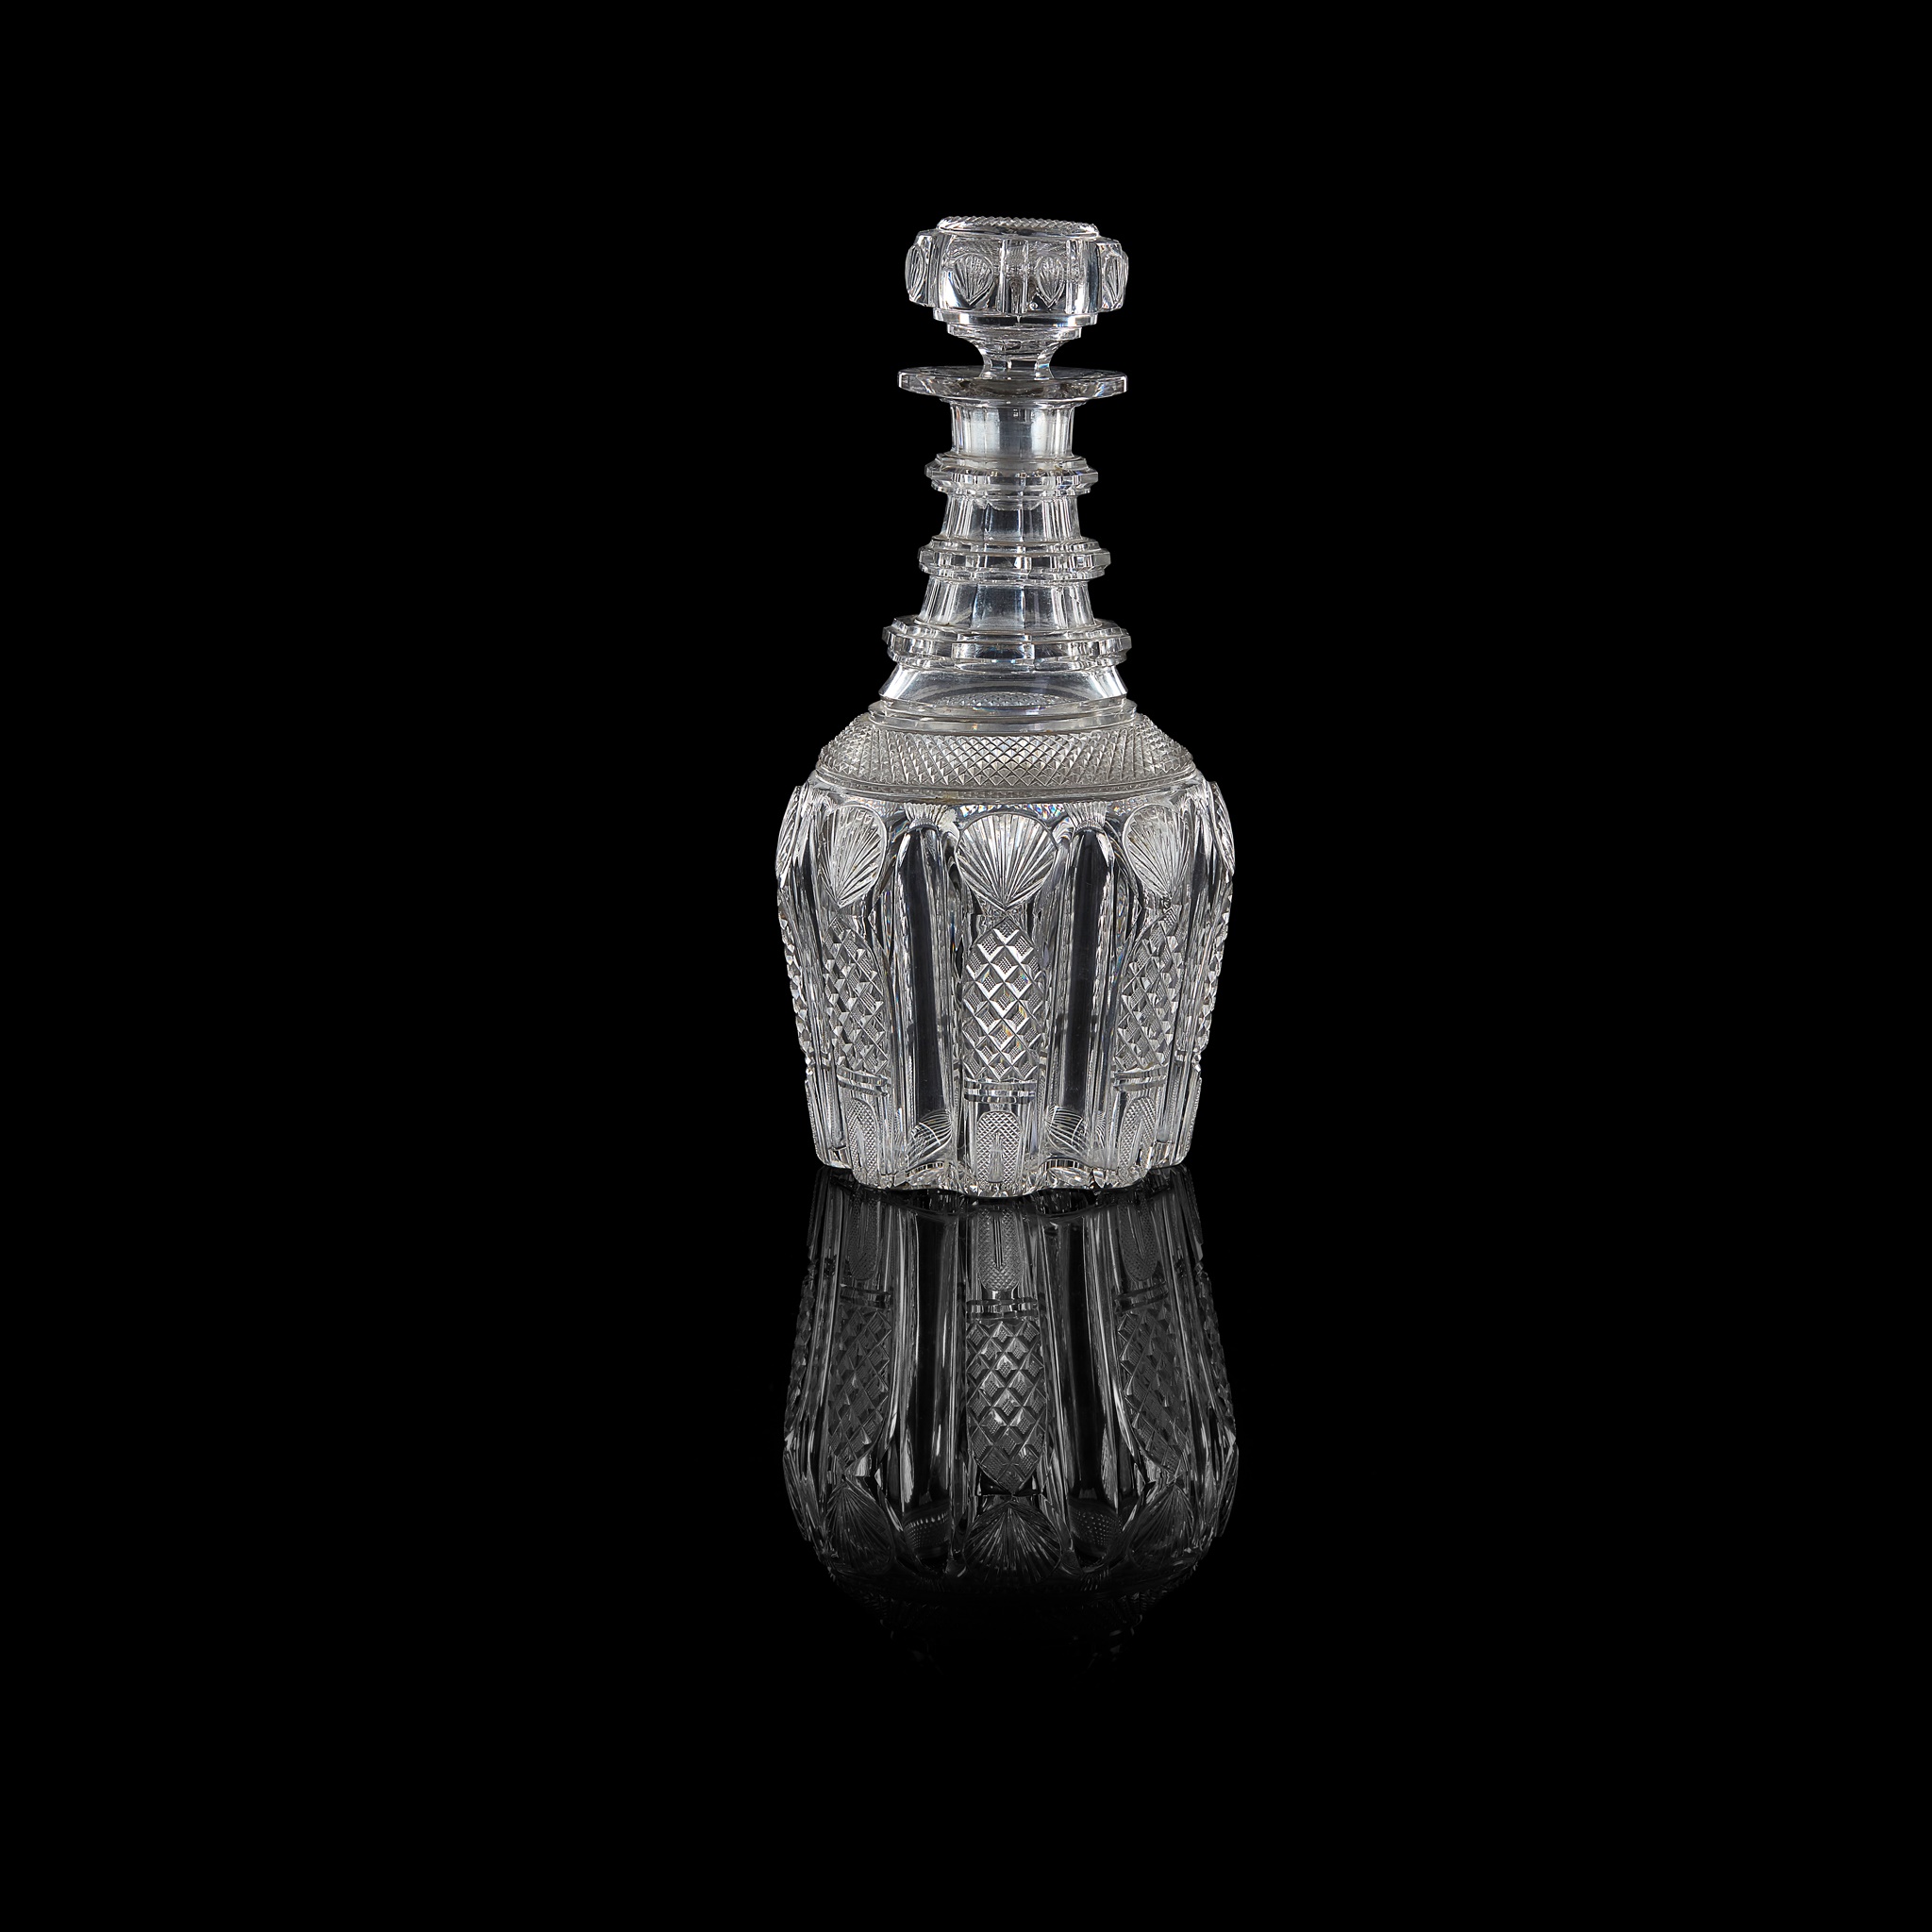 PAIR OF FULL BOTTLE TRIPLE NECK RING DECANTERS AND A MATCHING HALF BOTTLE DECANTER EARLY 19TH - Image 3 of 3